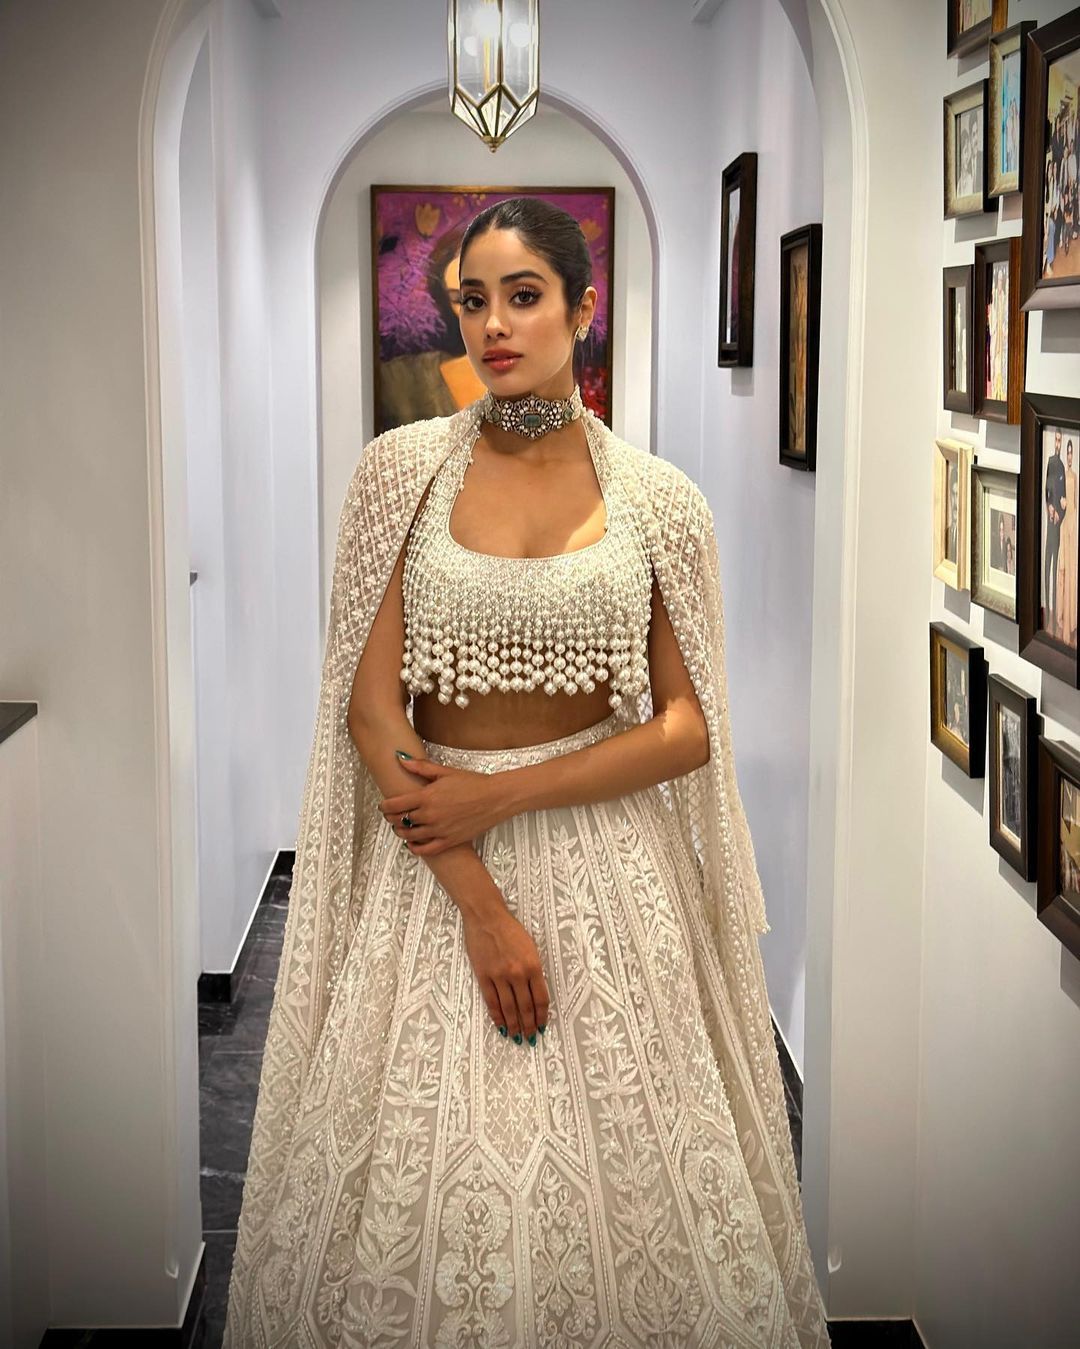 ethinc outfit worth stealing from Janhvi Kapoor's wardrobe